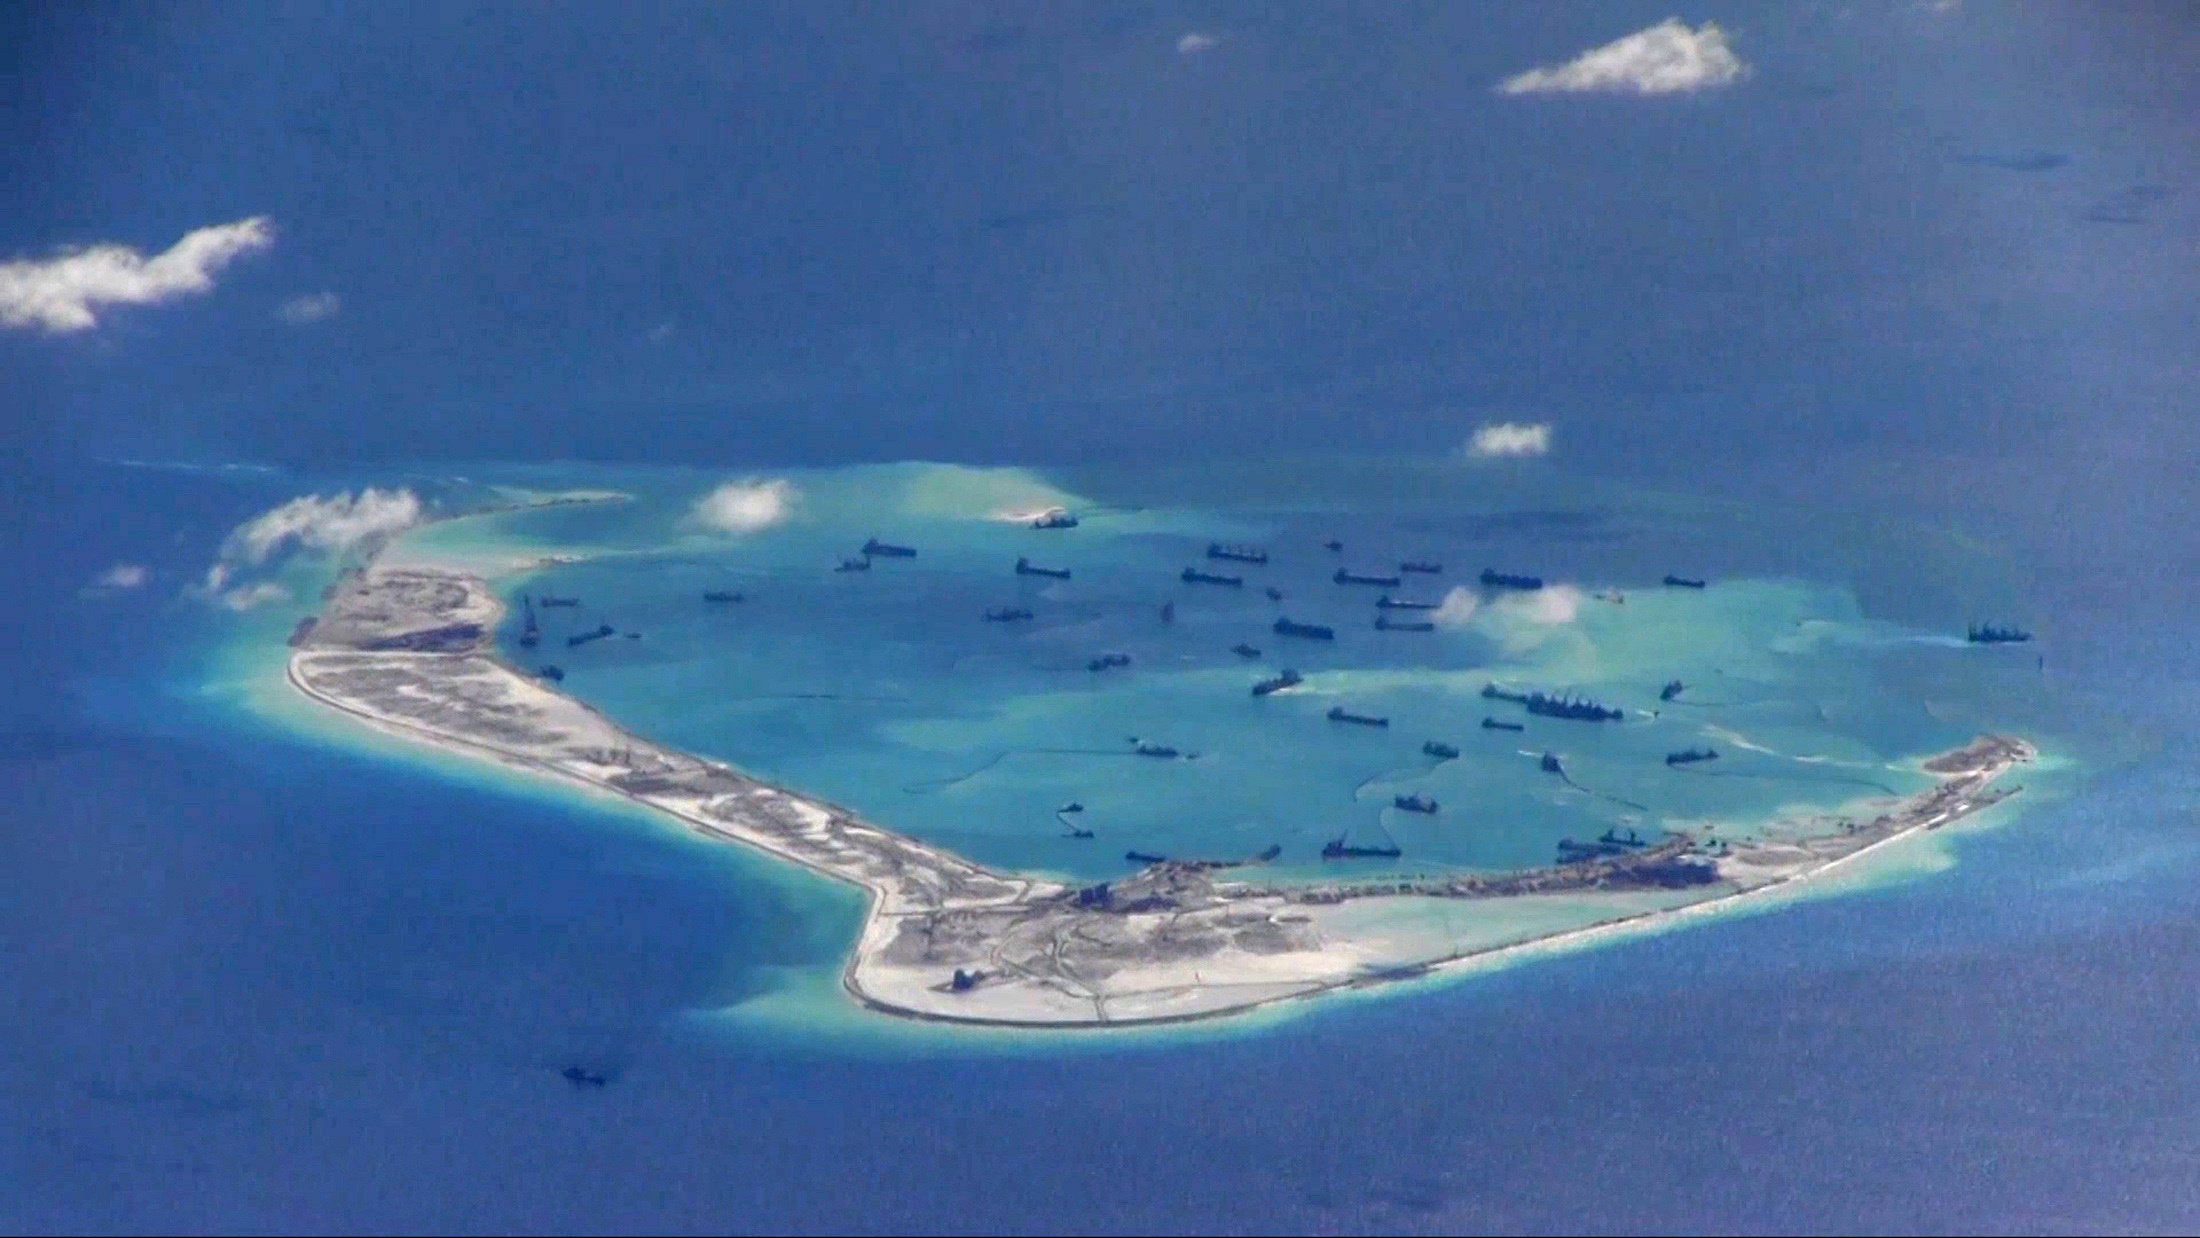 Chinese dredging vessels are purportedly seen in the waters around Mischief Reef in the disputed Spratly Islands in the South China Sea in this still image from video taken by a P-8A Poseidon surveillance aircraft provided by the United States Navy